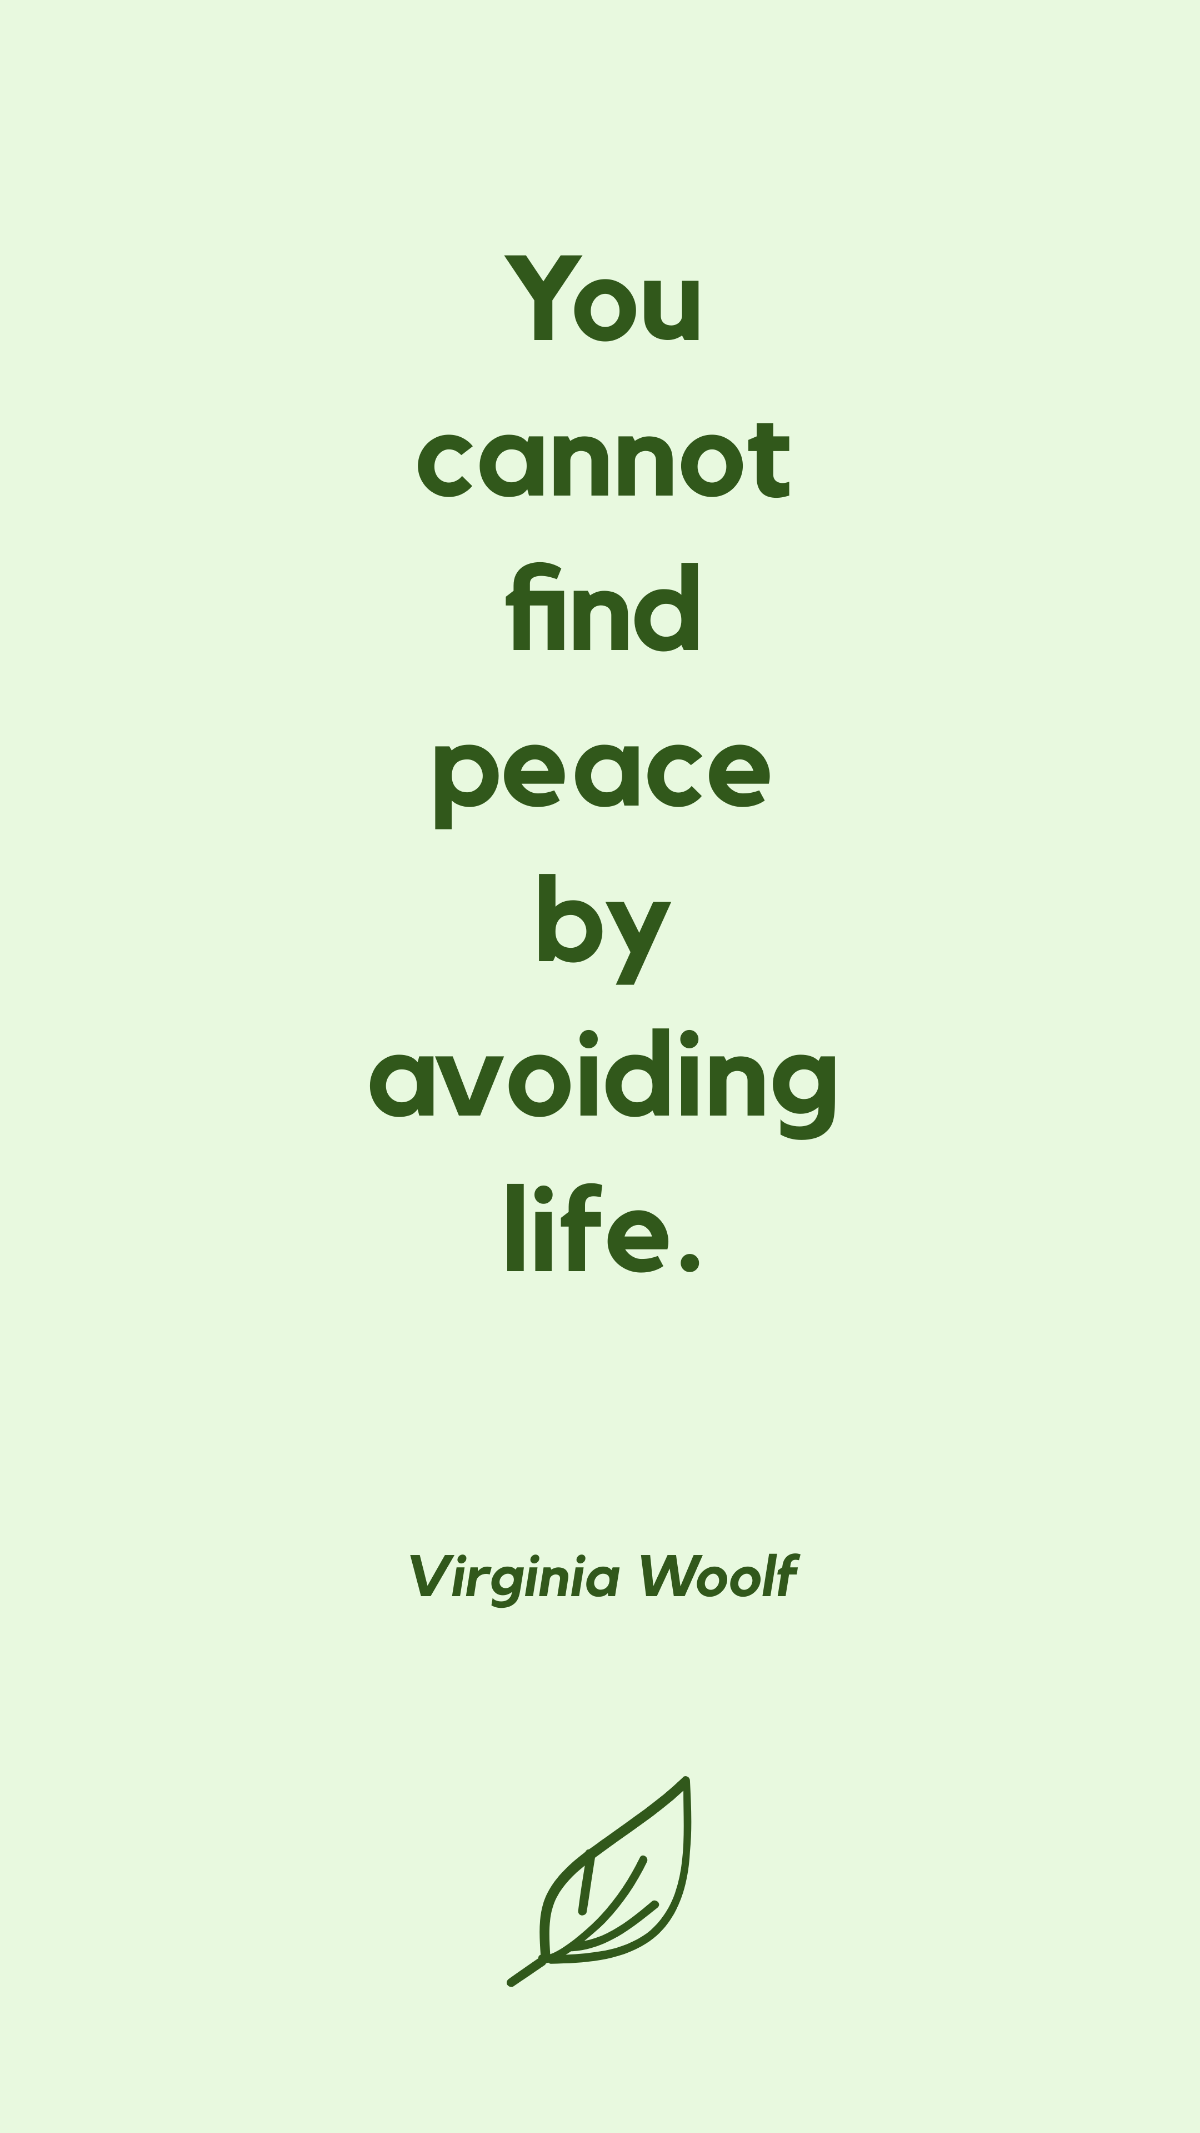 Free Virginia Woolf - You cannot find peace by avoiding life. Template